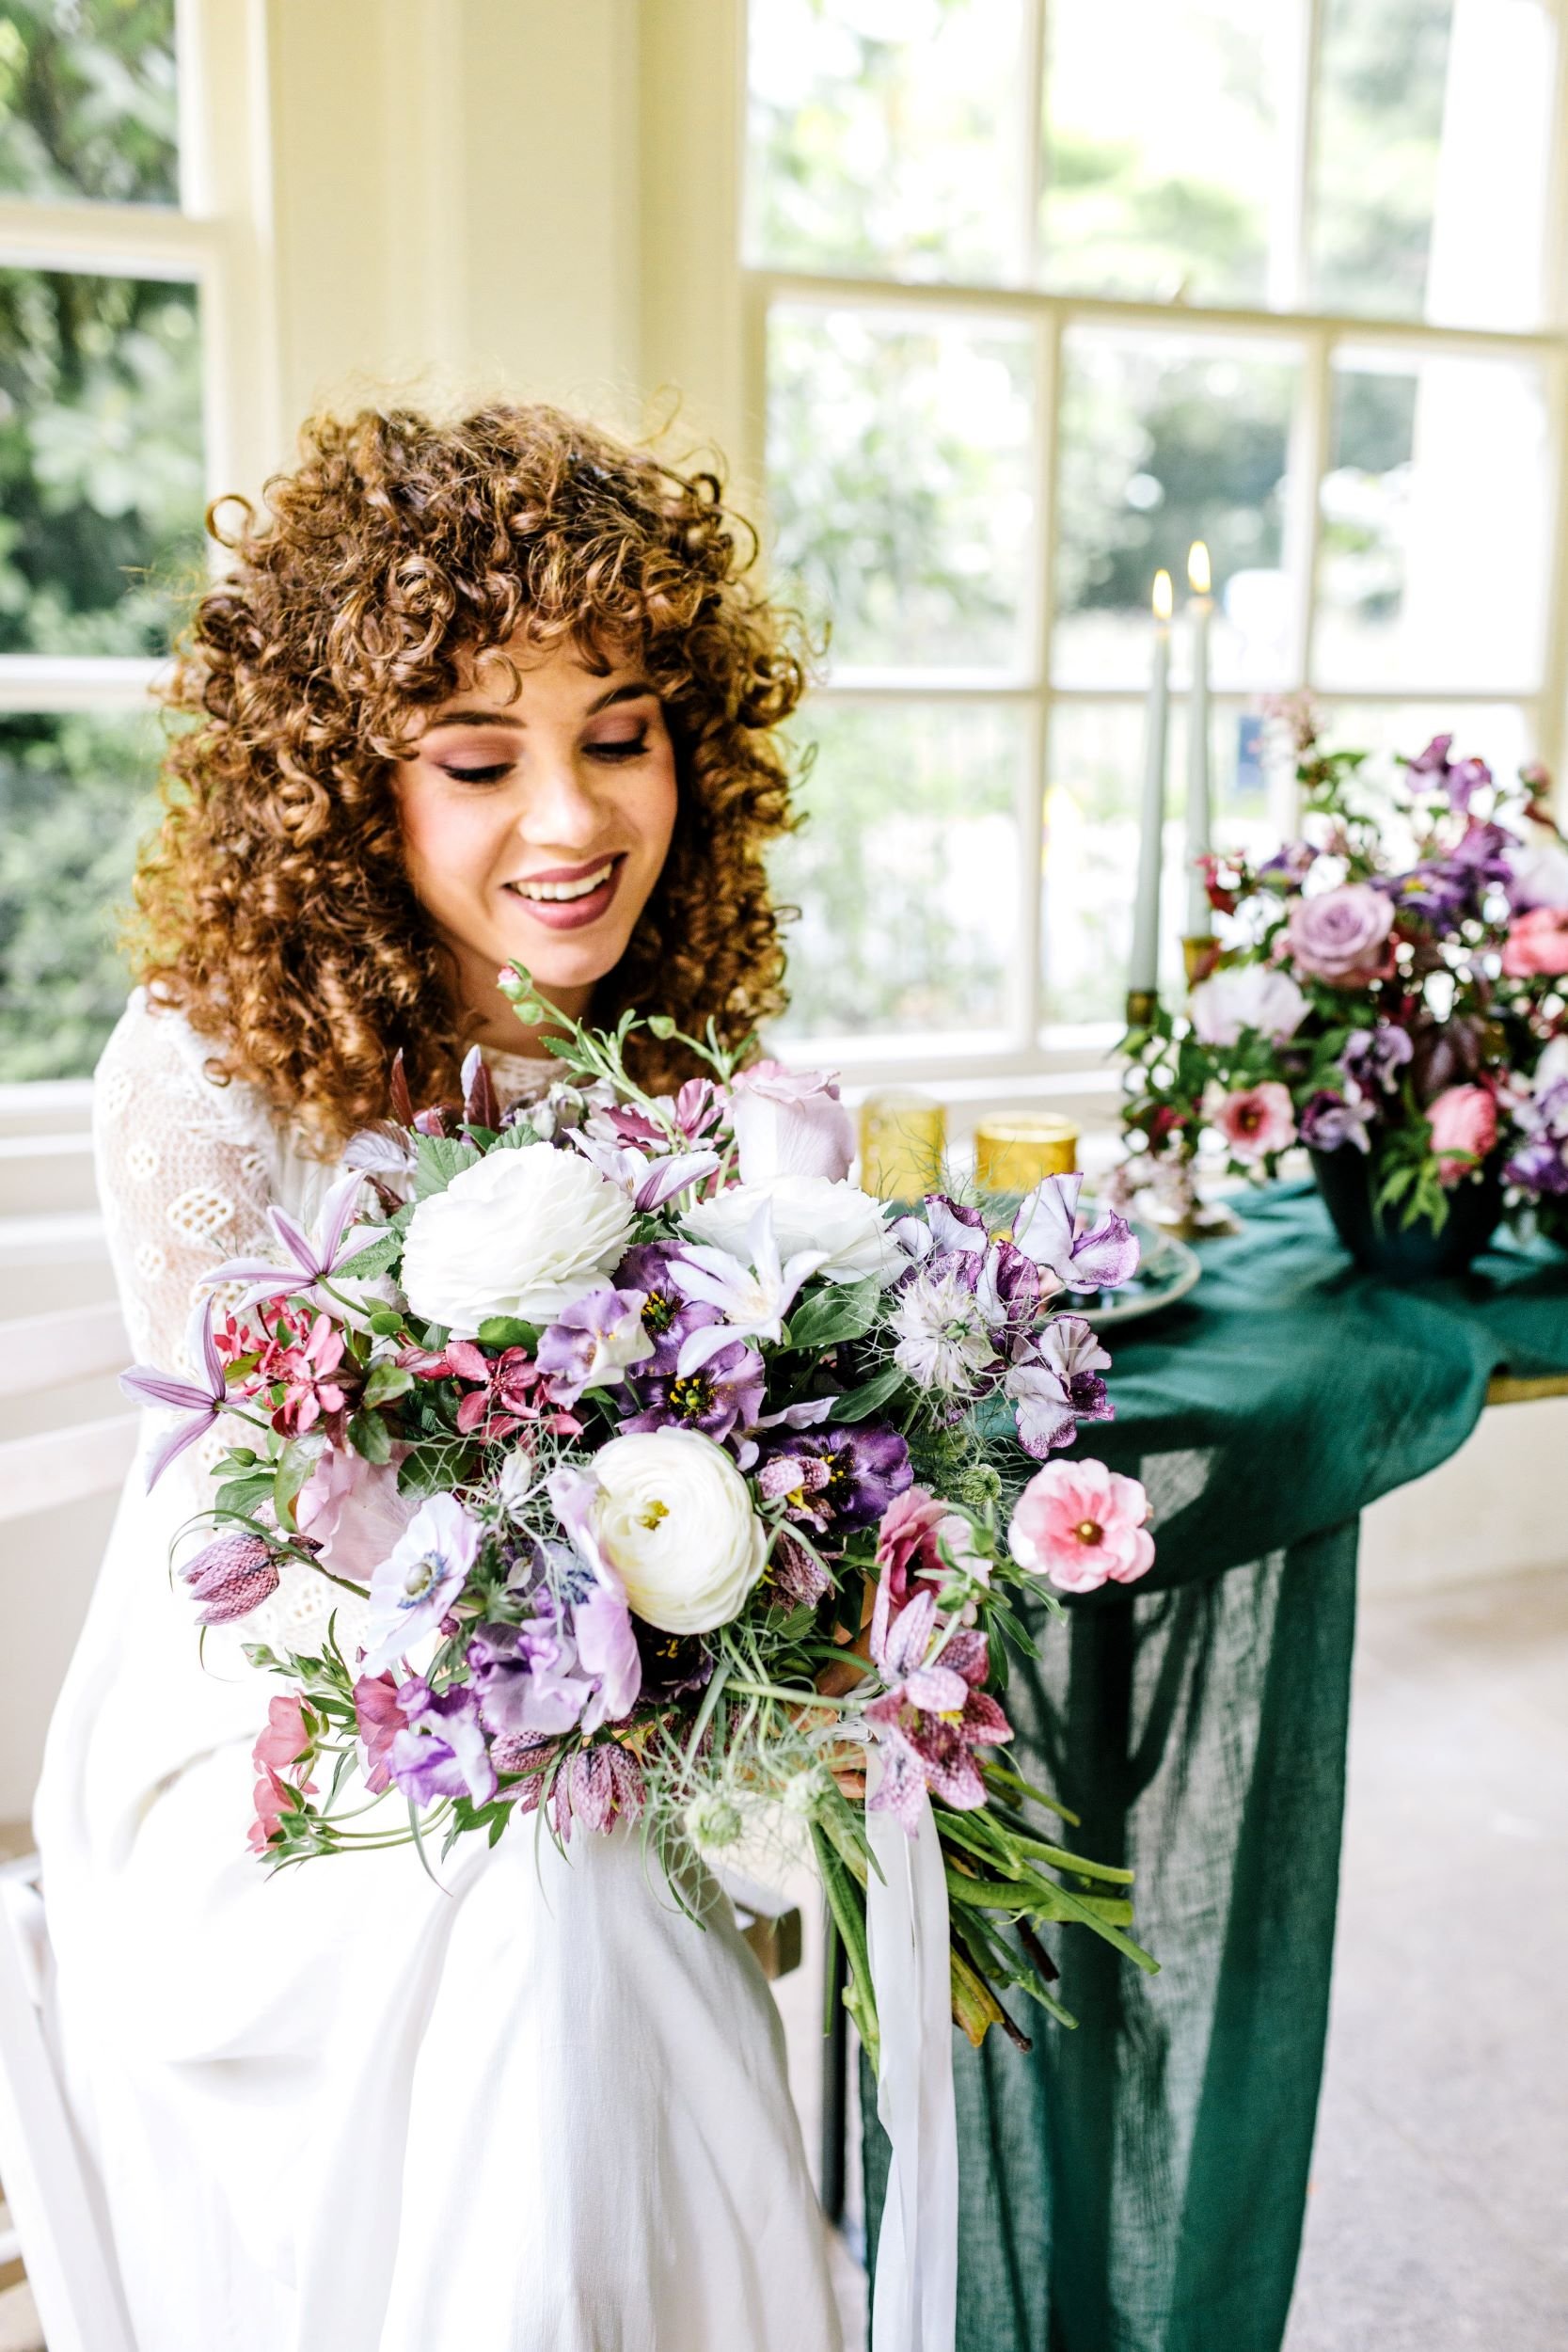 Bride with bouquet on the wedding flowers course